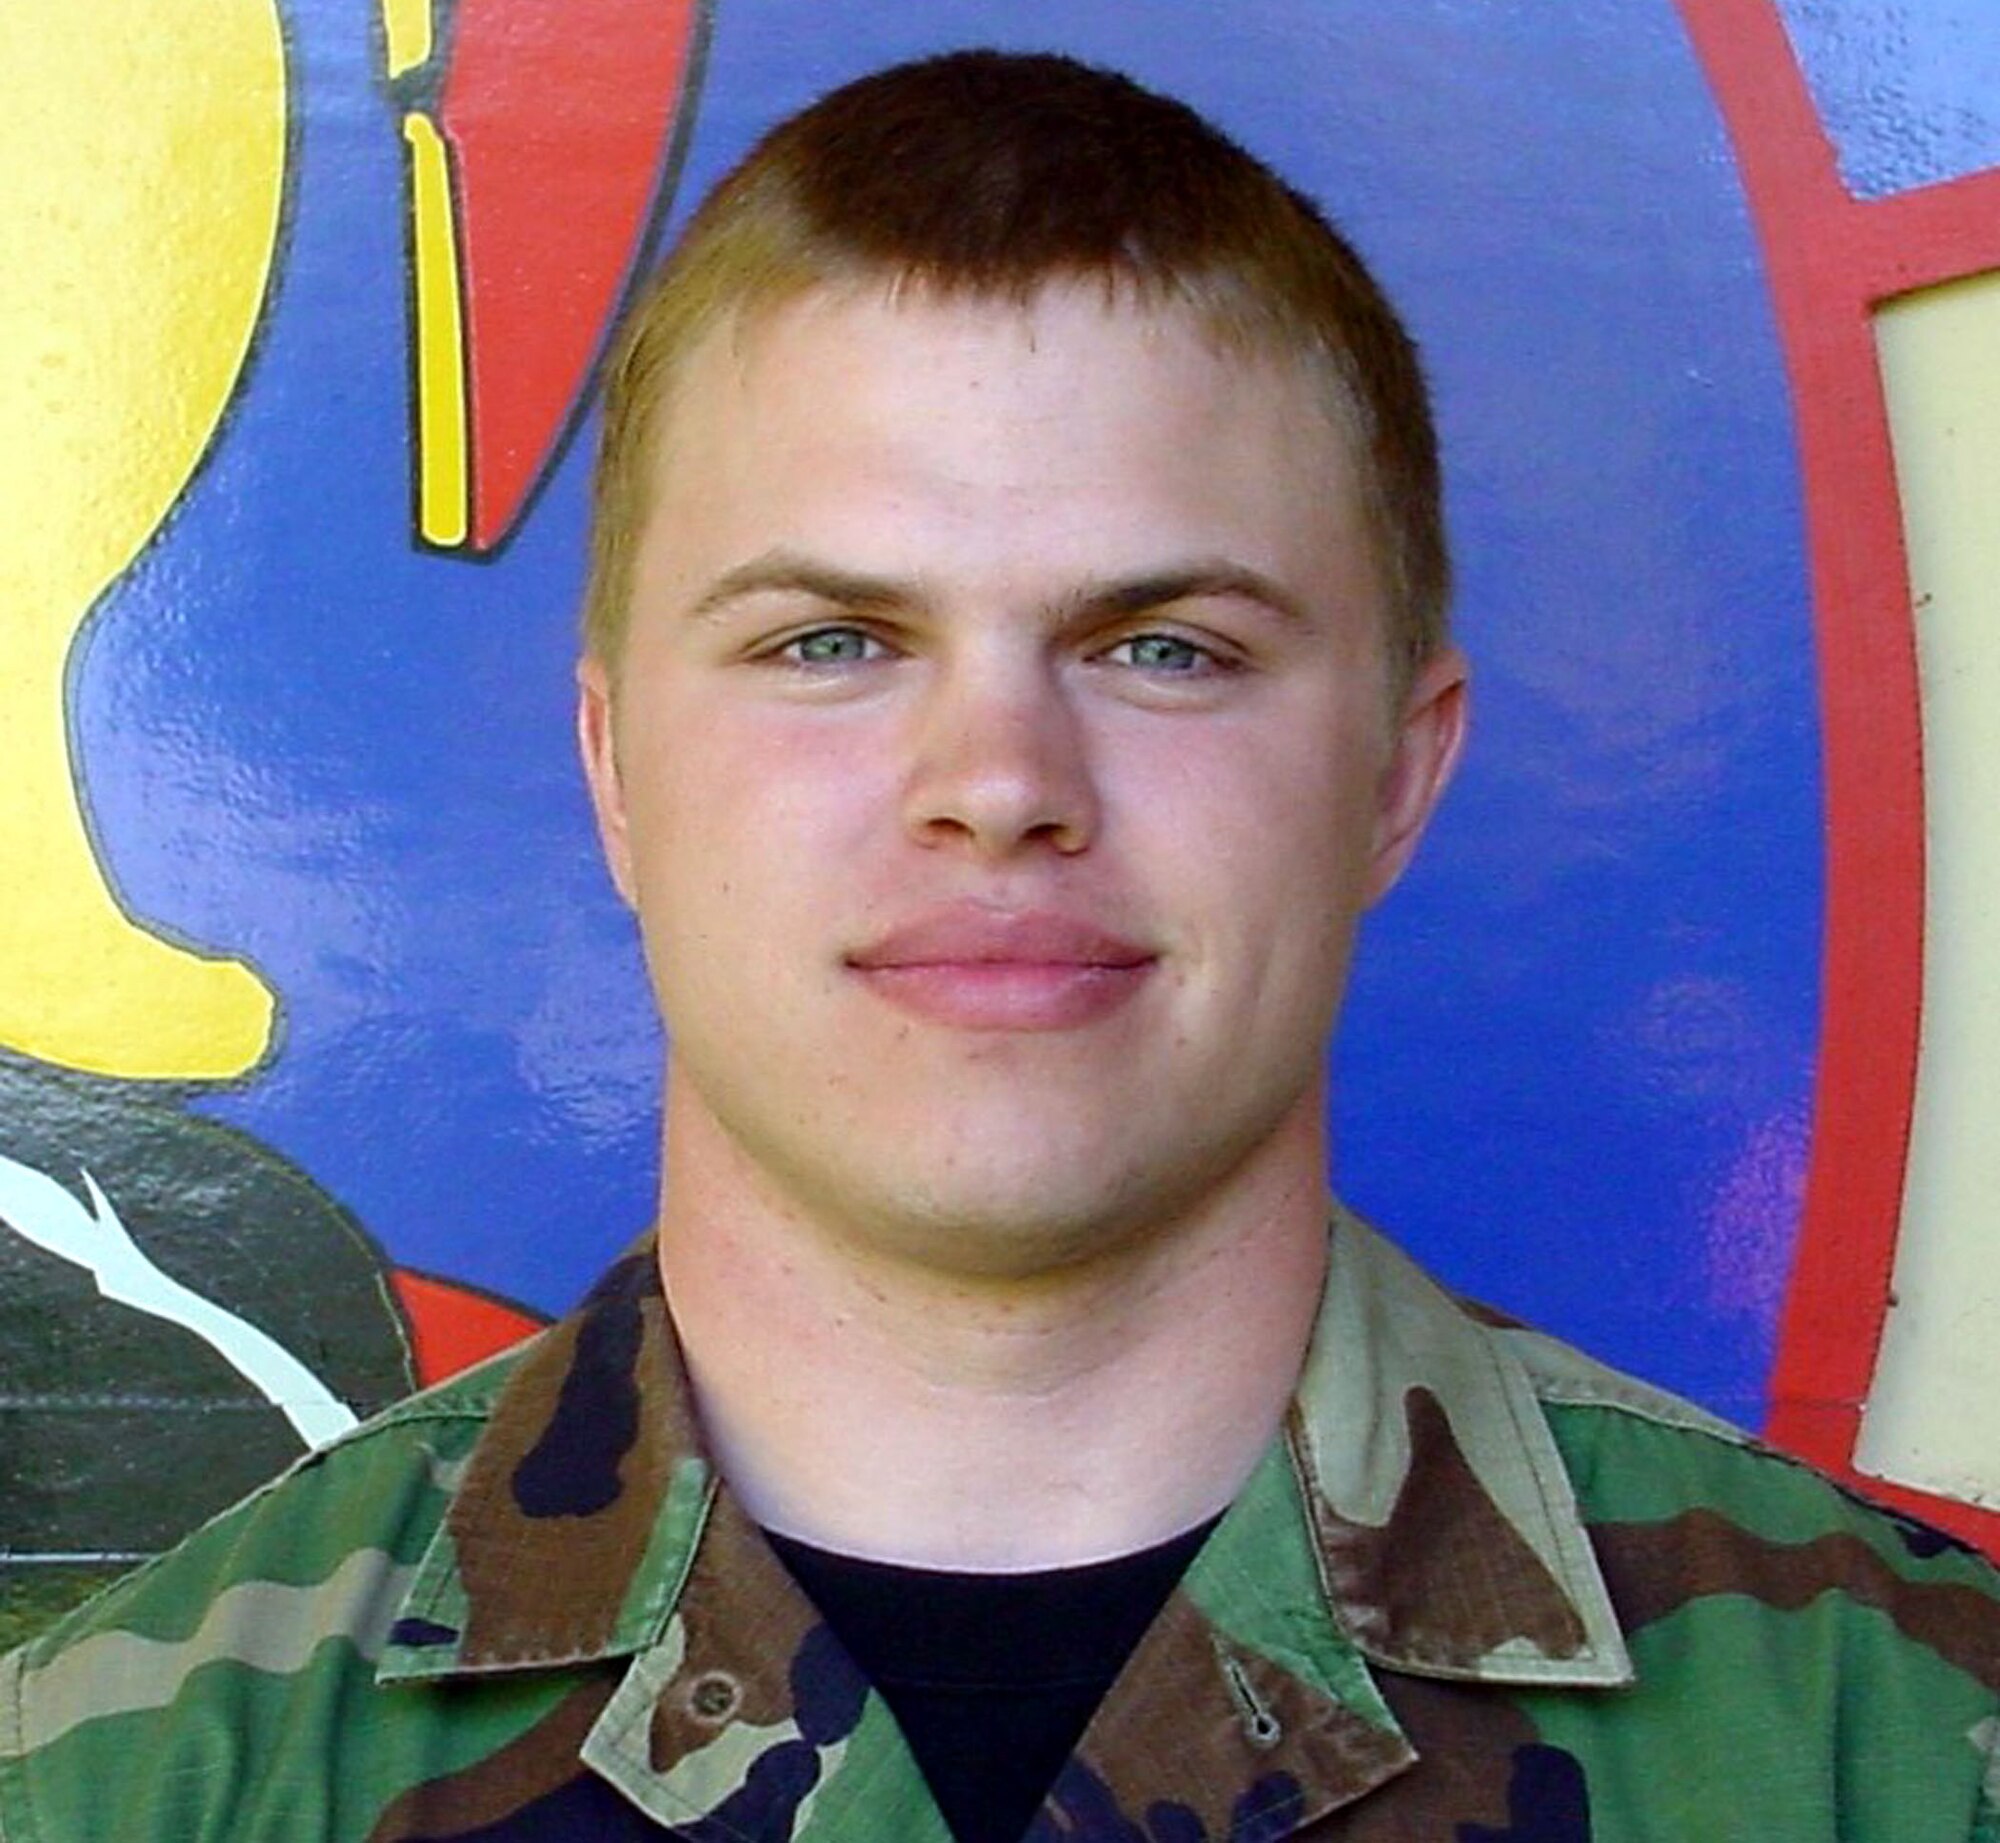 Staff Sgt. Lathan Peterson, 570th Global Mobility Squadron aircraft maintenance technician, passed away July 6 as a result of injuries received in a motocross accident in Dixon, Calif.